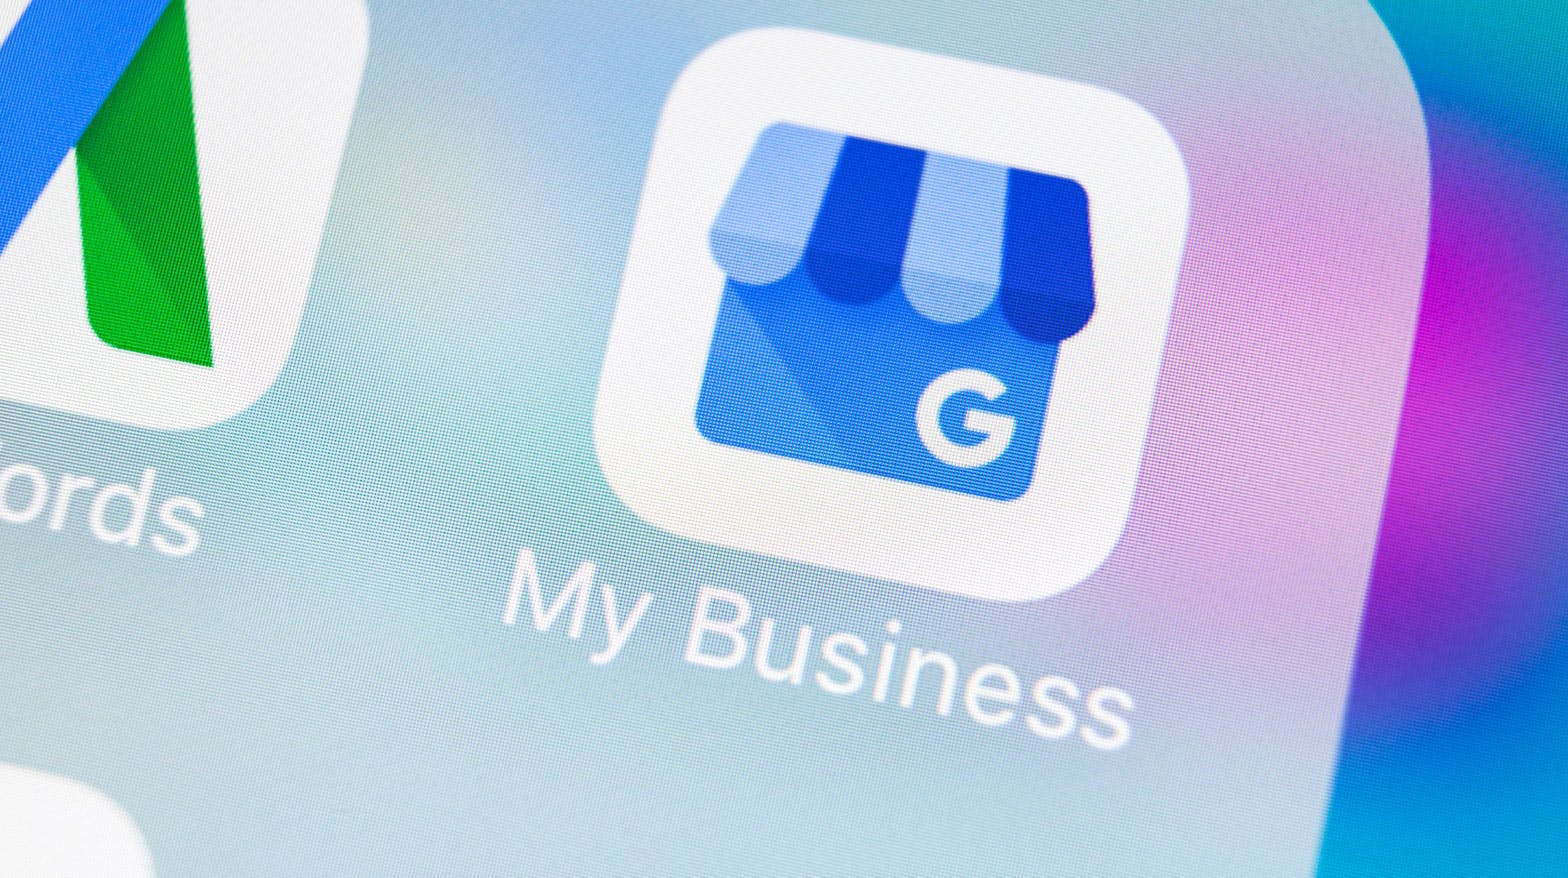 Google My Business app icon on a smartphone